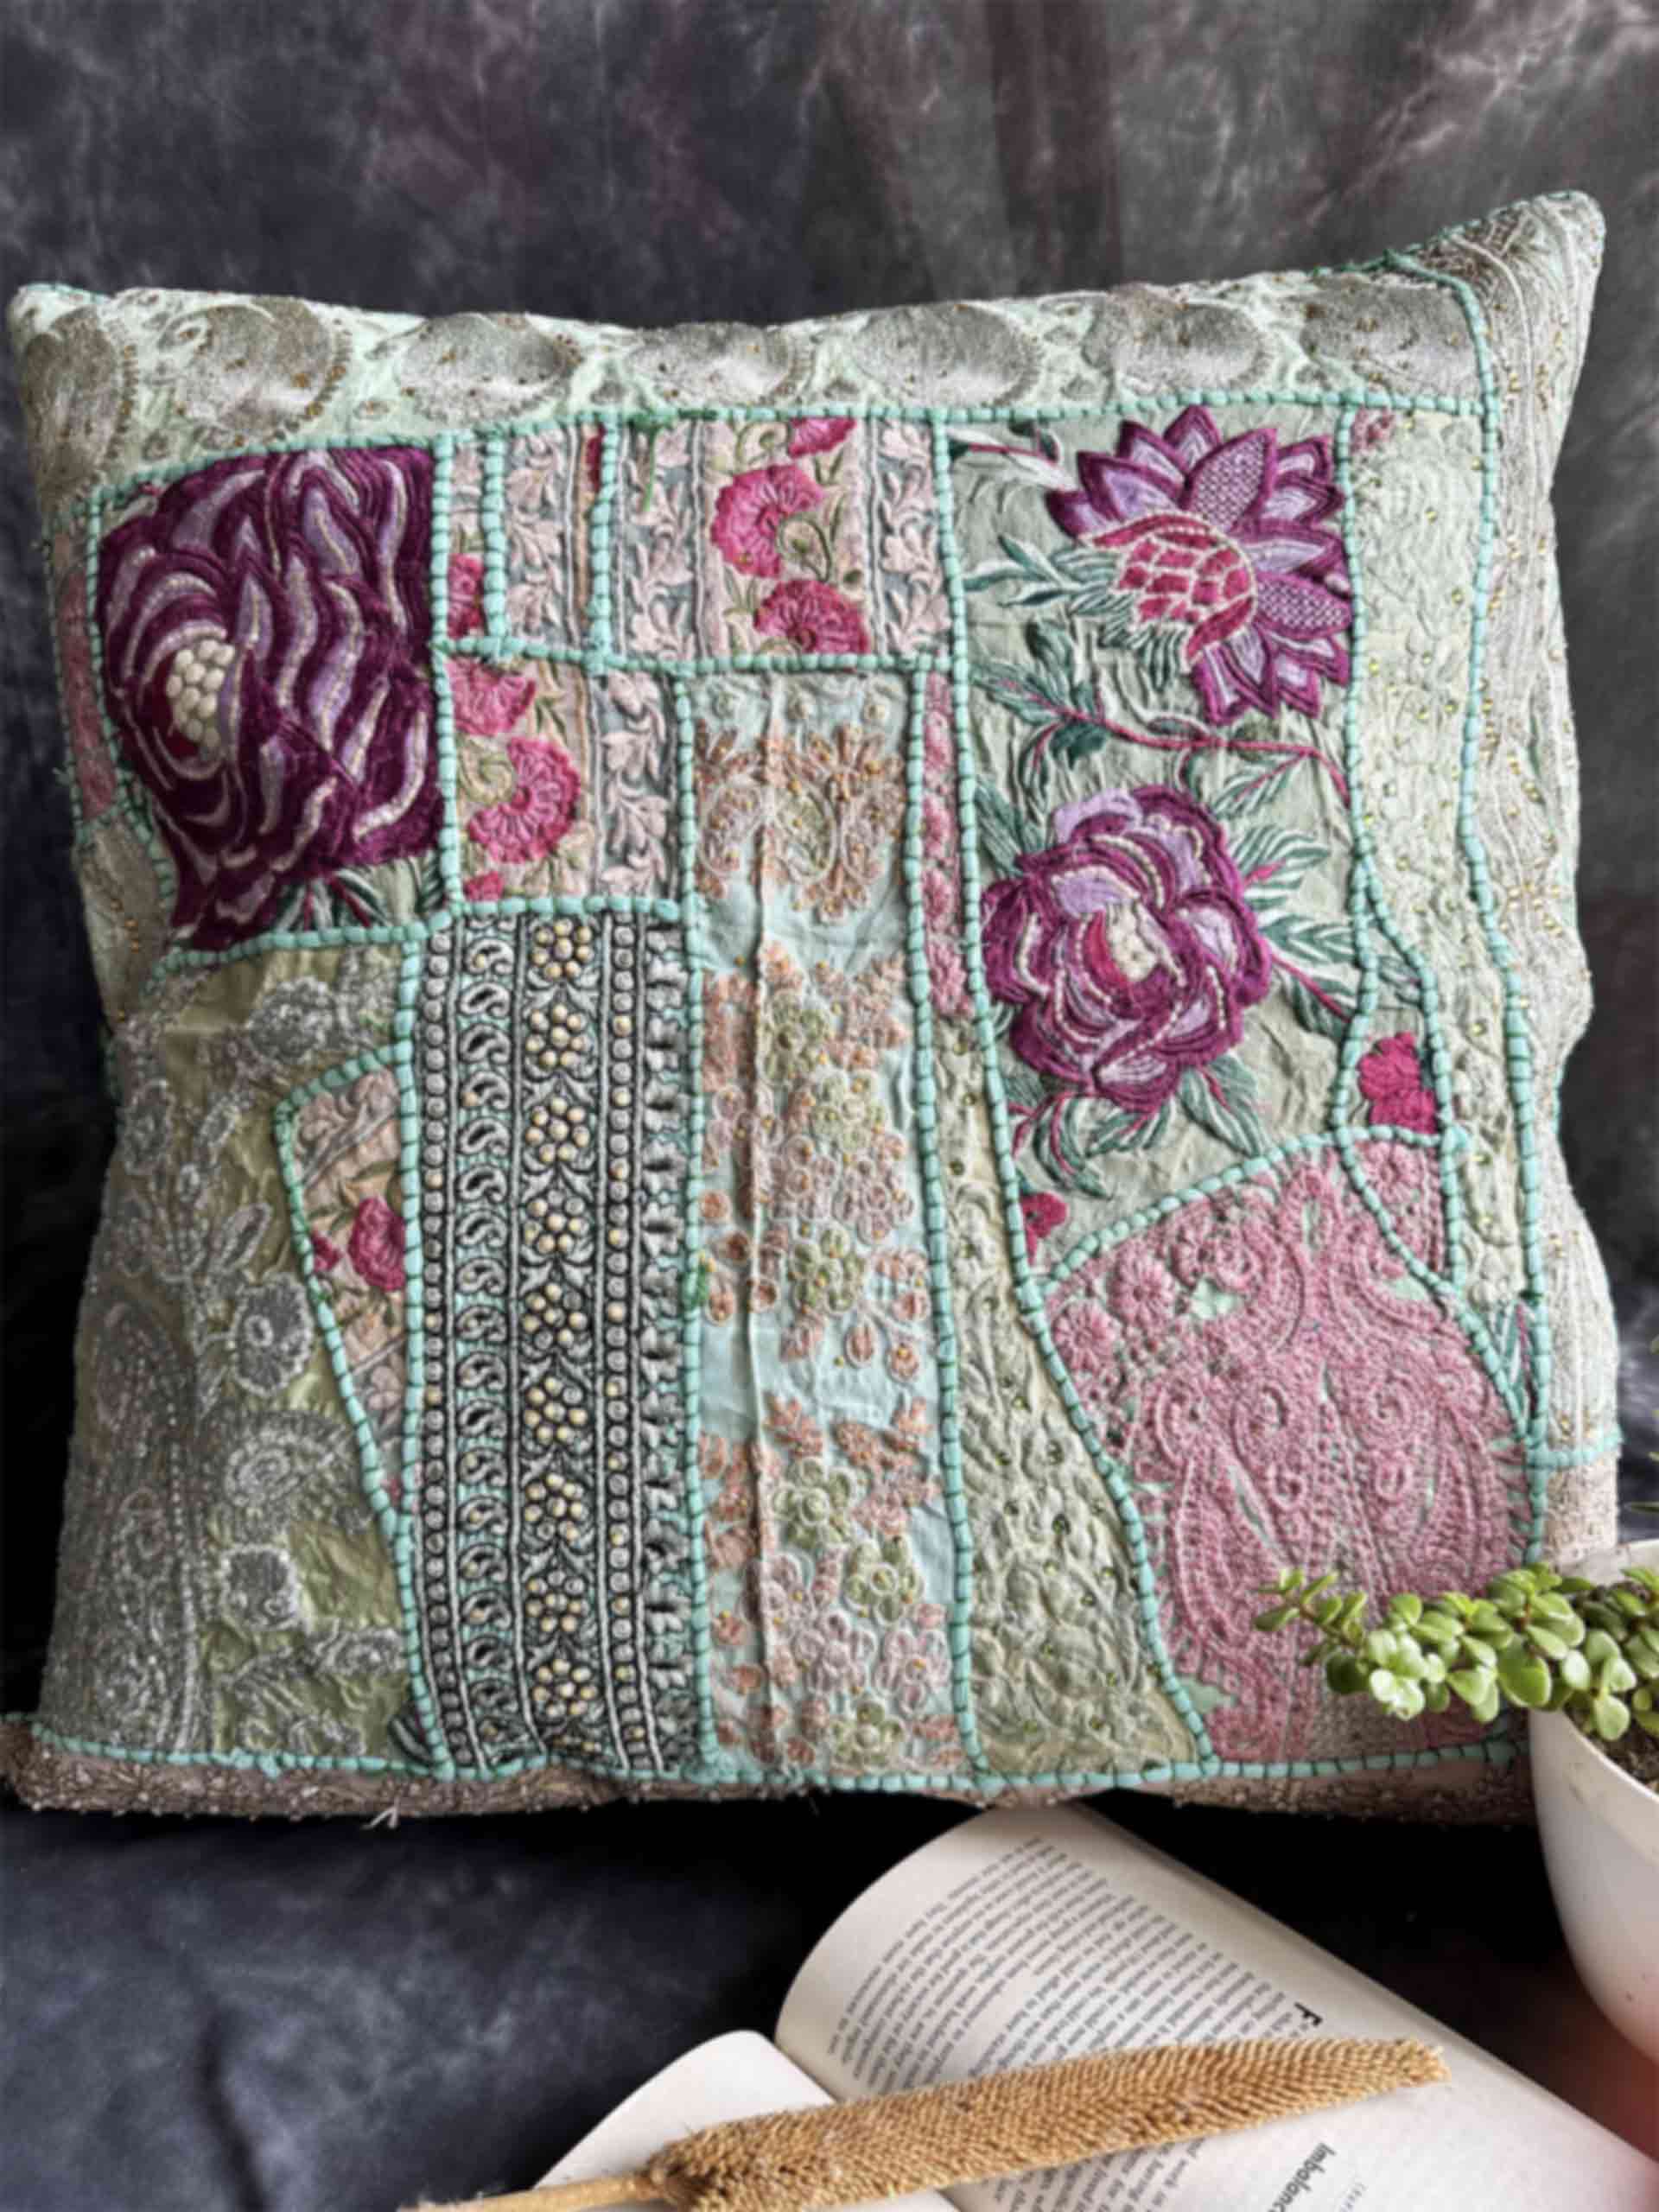 Petals - embroidered patchwork cushion cover 24 X 24